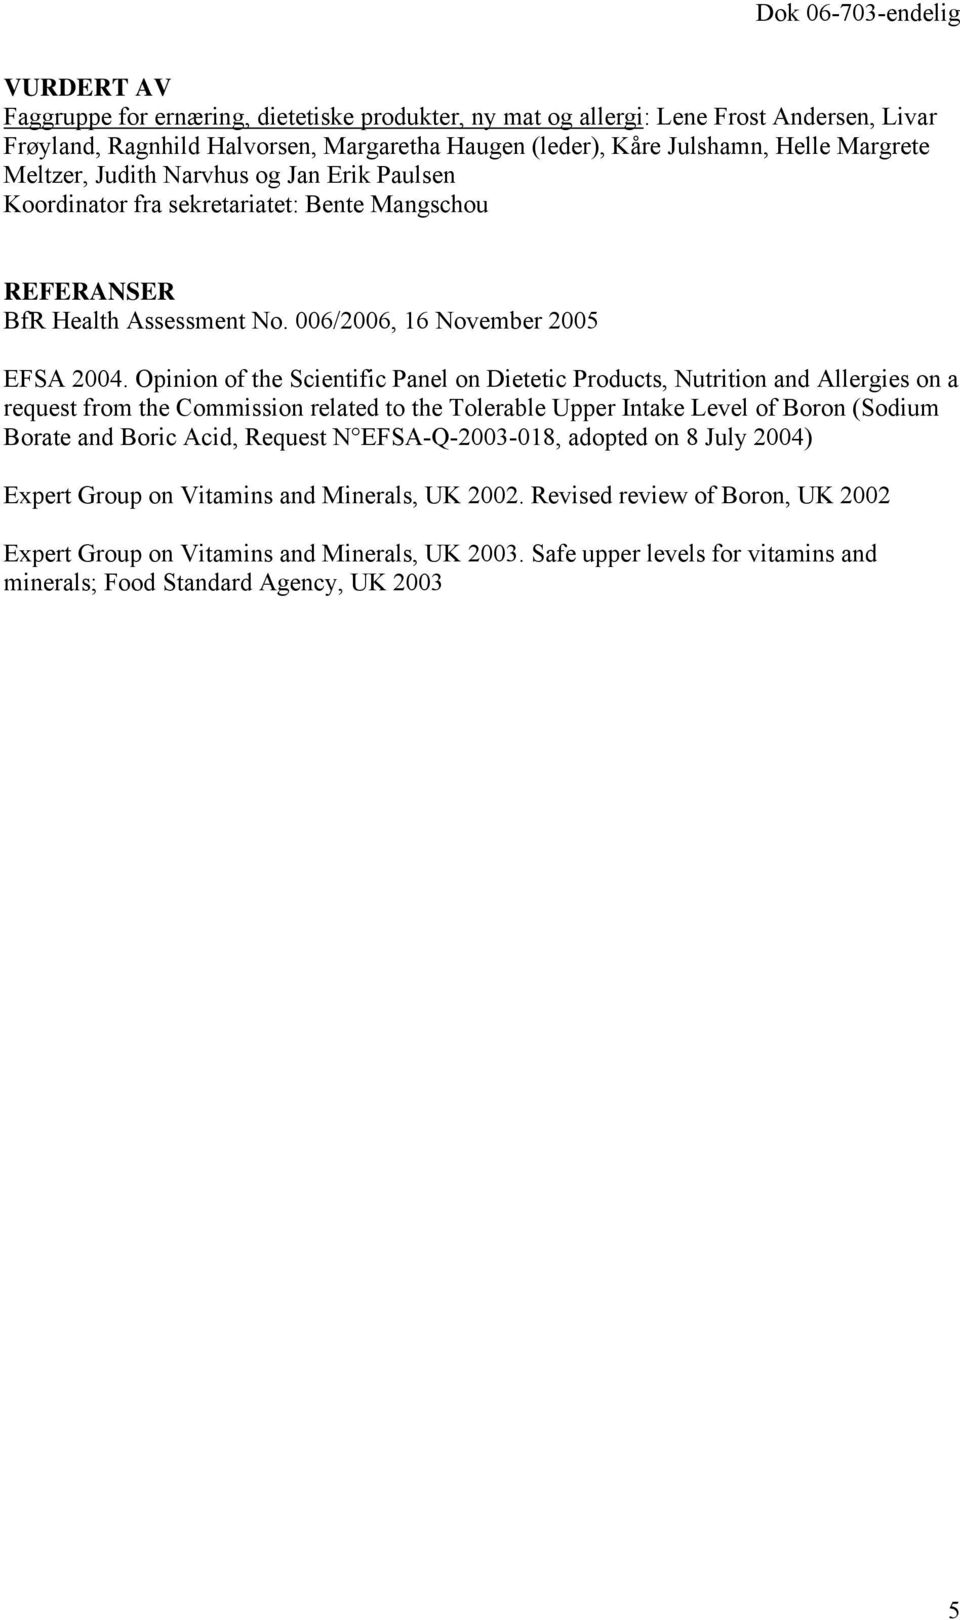 Opinion of the Scientific Panel on Dietetic Products, Nutrition and Allergies on a request from the Commission related to the Tolerable Upper Intake Level of Boron (Sodium Borate and Boric Acid,